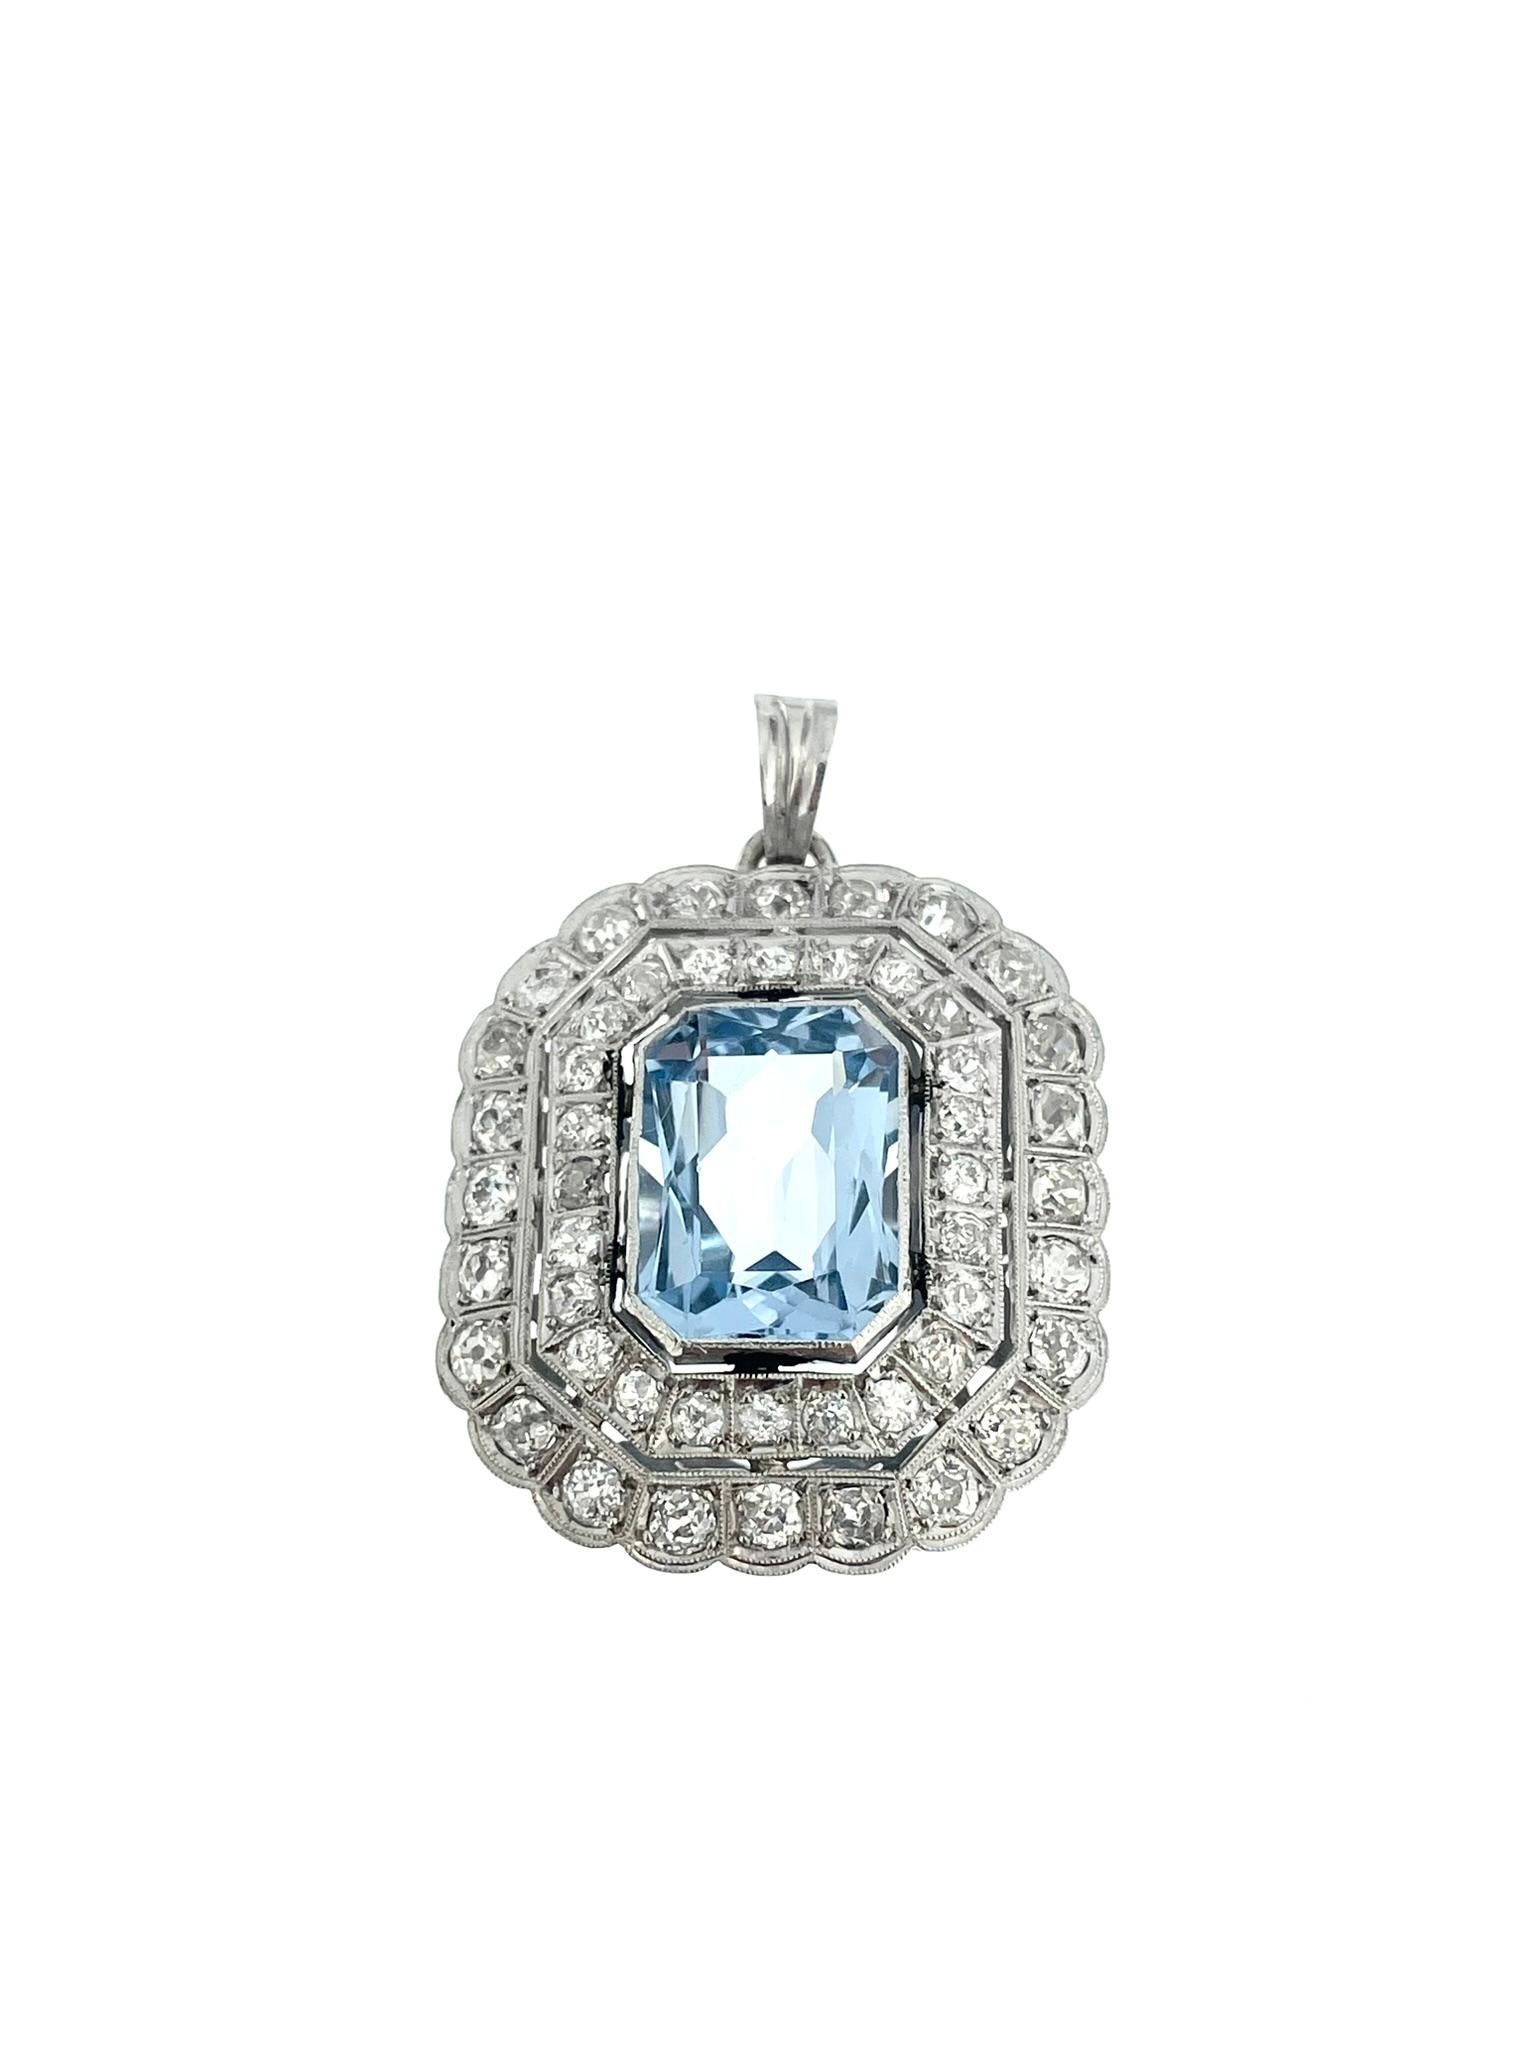 The Art Deco Style White Gold Pendant with Blue Spinel and Diamonds is a stunning piece of jewelry that captures the essence of the Art Deco era with its geometric lines, bold design, and luxurious materials. Crafted from 18-karat white gold, this